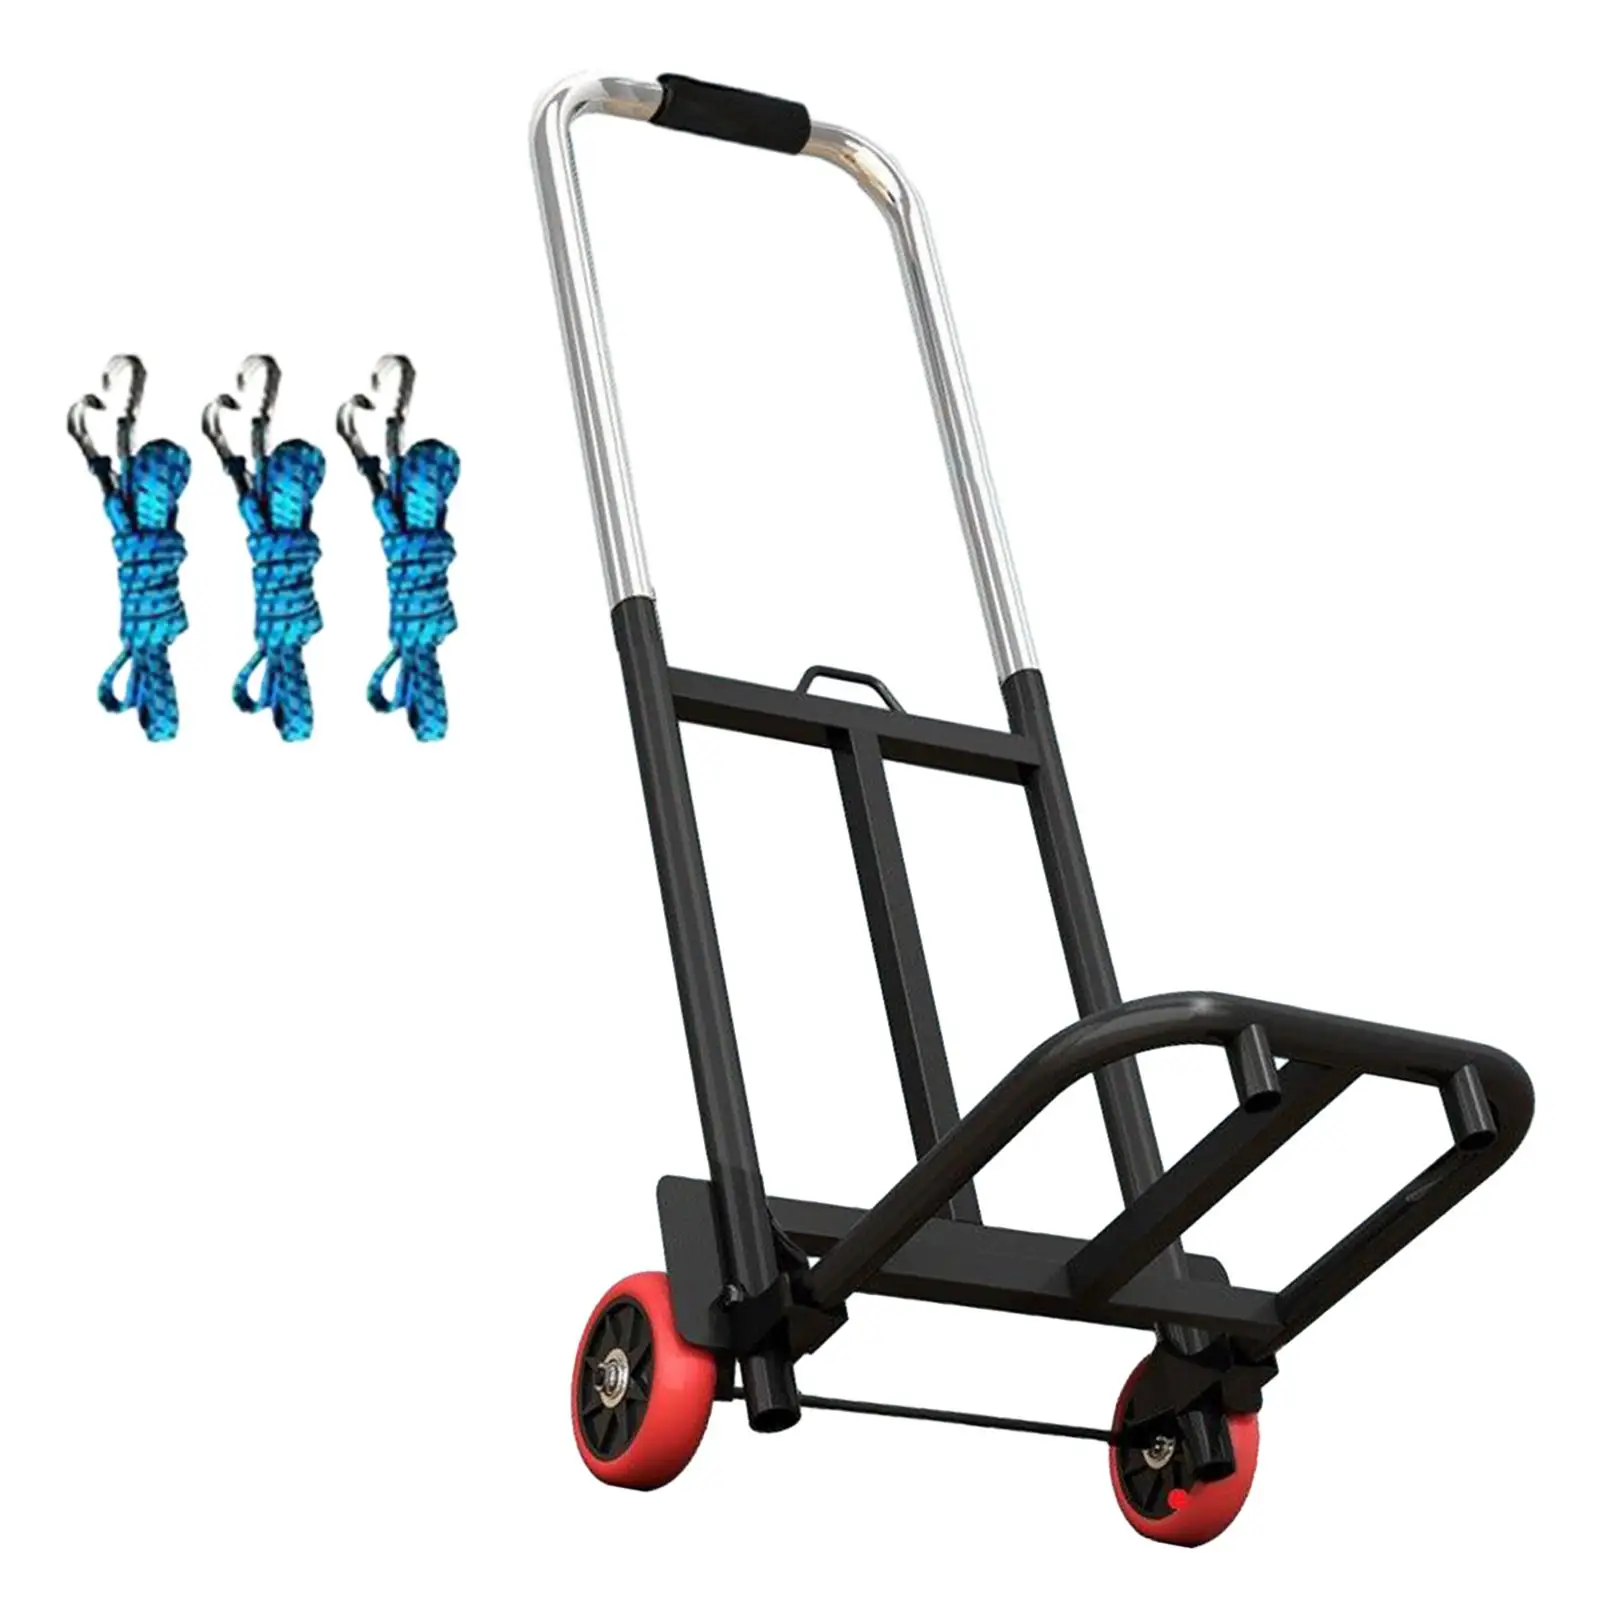 Foldable Hand Truck Luggage Hand Cart Sturdy Telescopic 50cm-80cm Adjustable Handle with 3 Elastic Ropes for Personal Travel